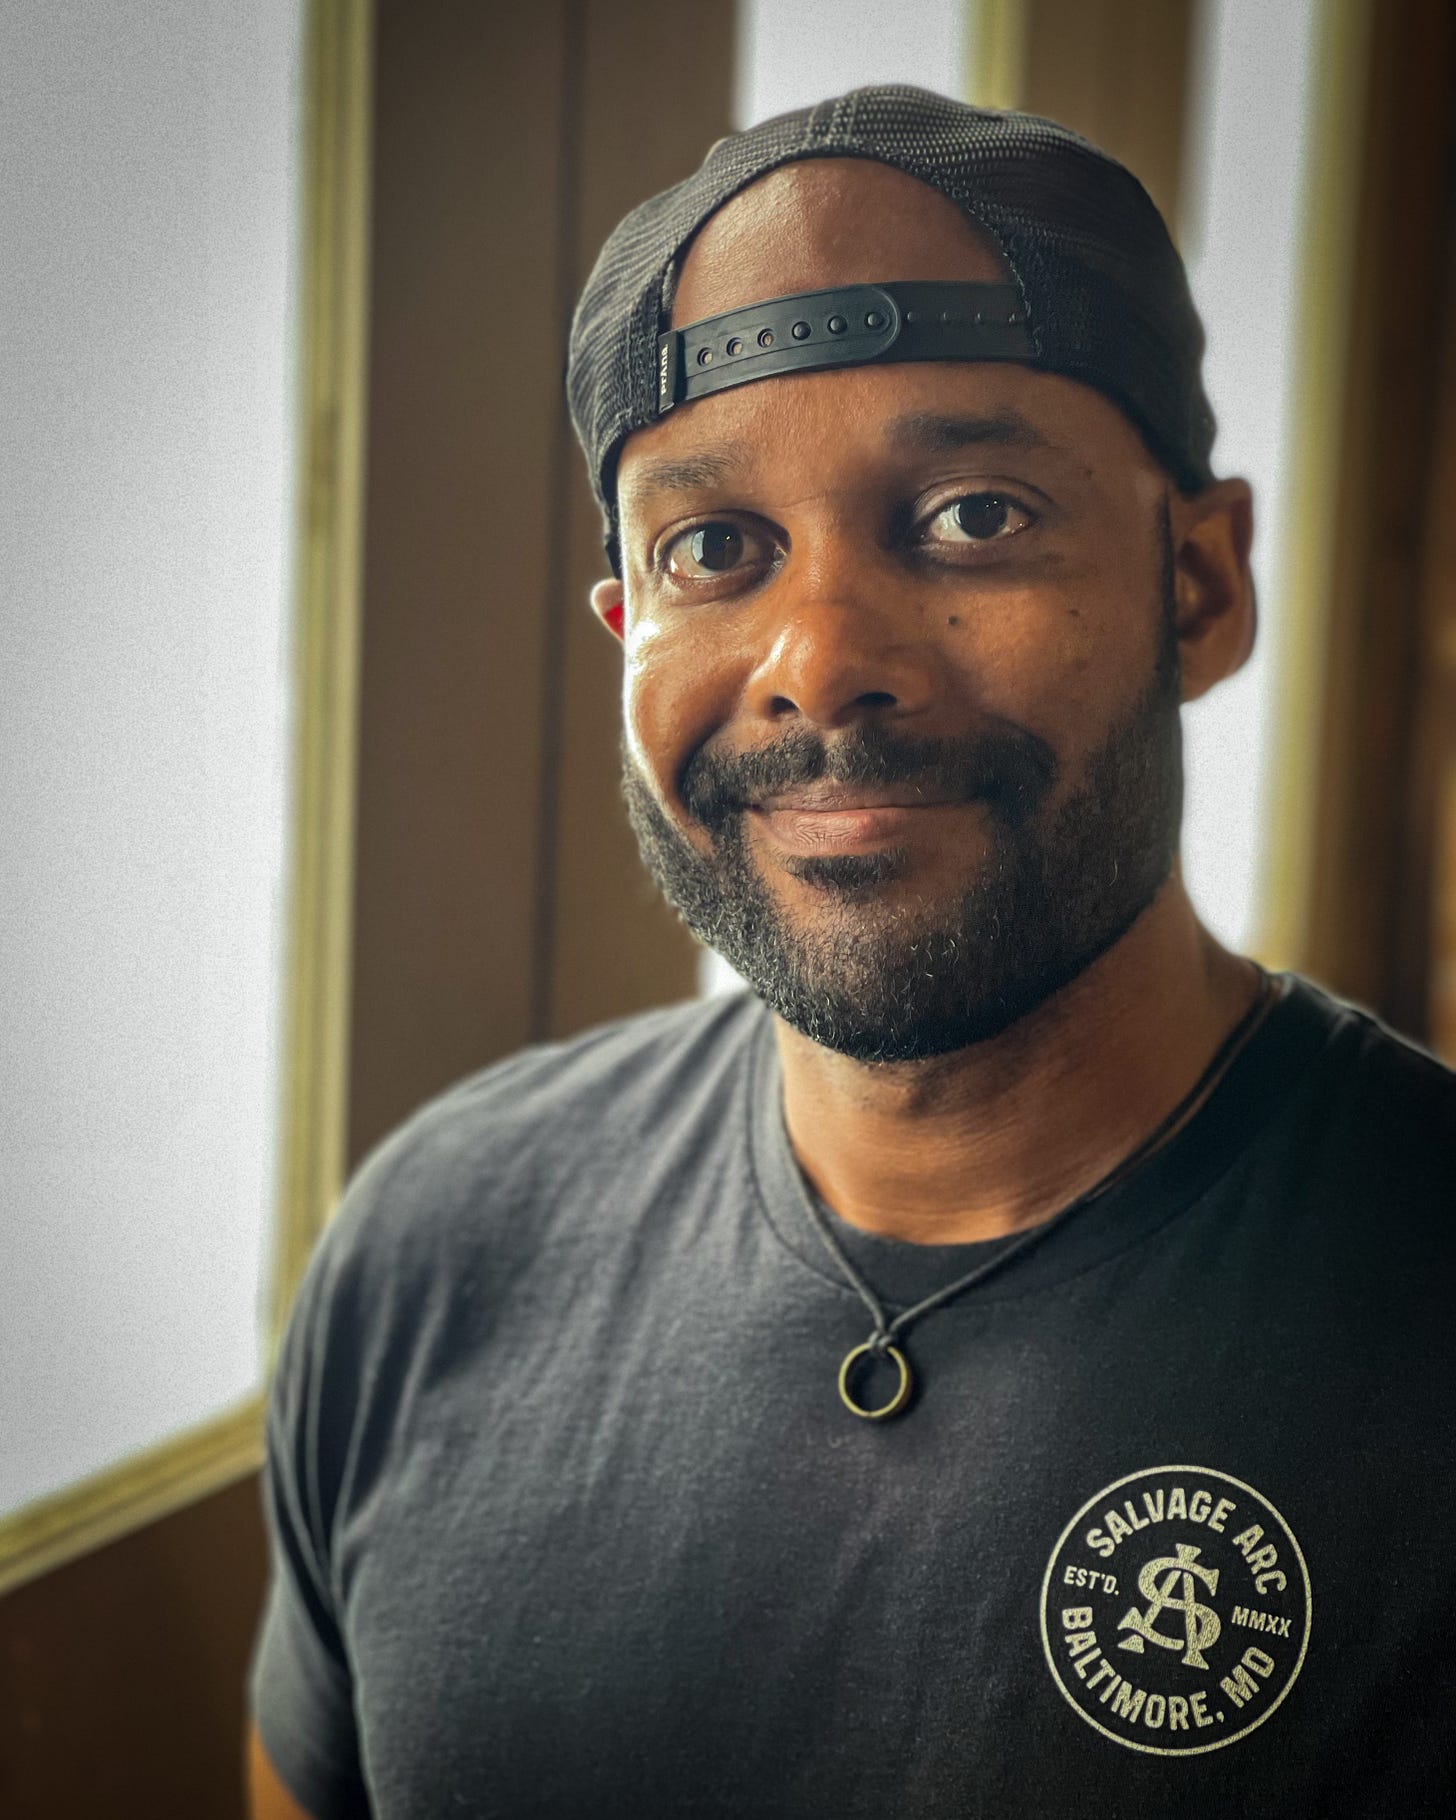 Picture of Evan Woodard. His body is angled to the viewer's left side. He wears a black baseball cap backwards, a black t-shirt with the Salvage Arc logo on it and a necklace with a silver ring on it. He has a slight smile, dark brown eyes, and a closely cropped beard and mustache. 